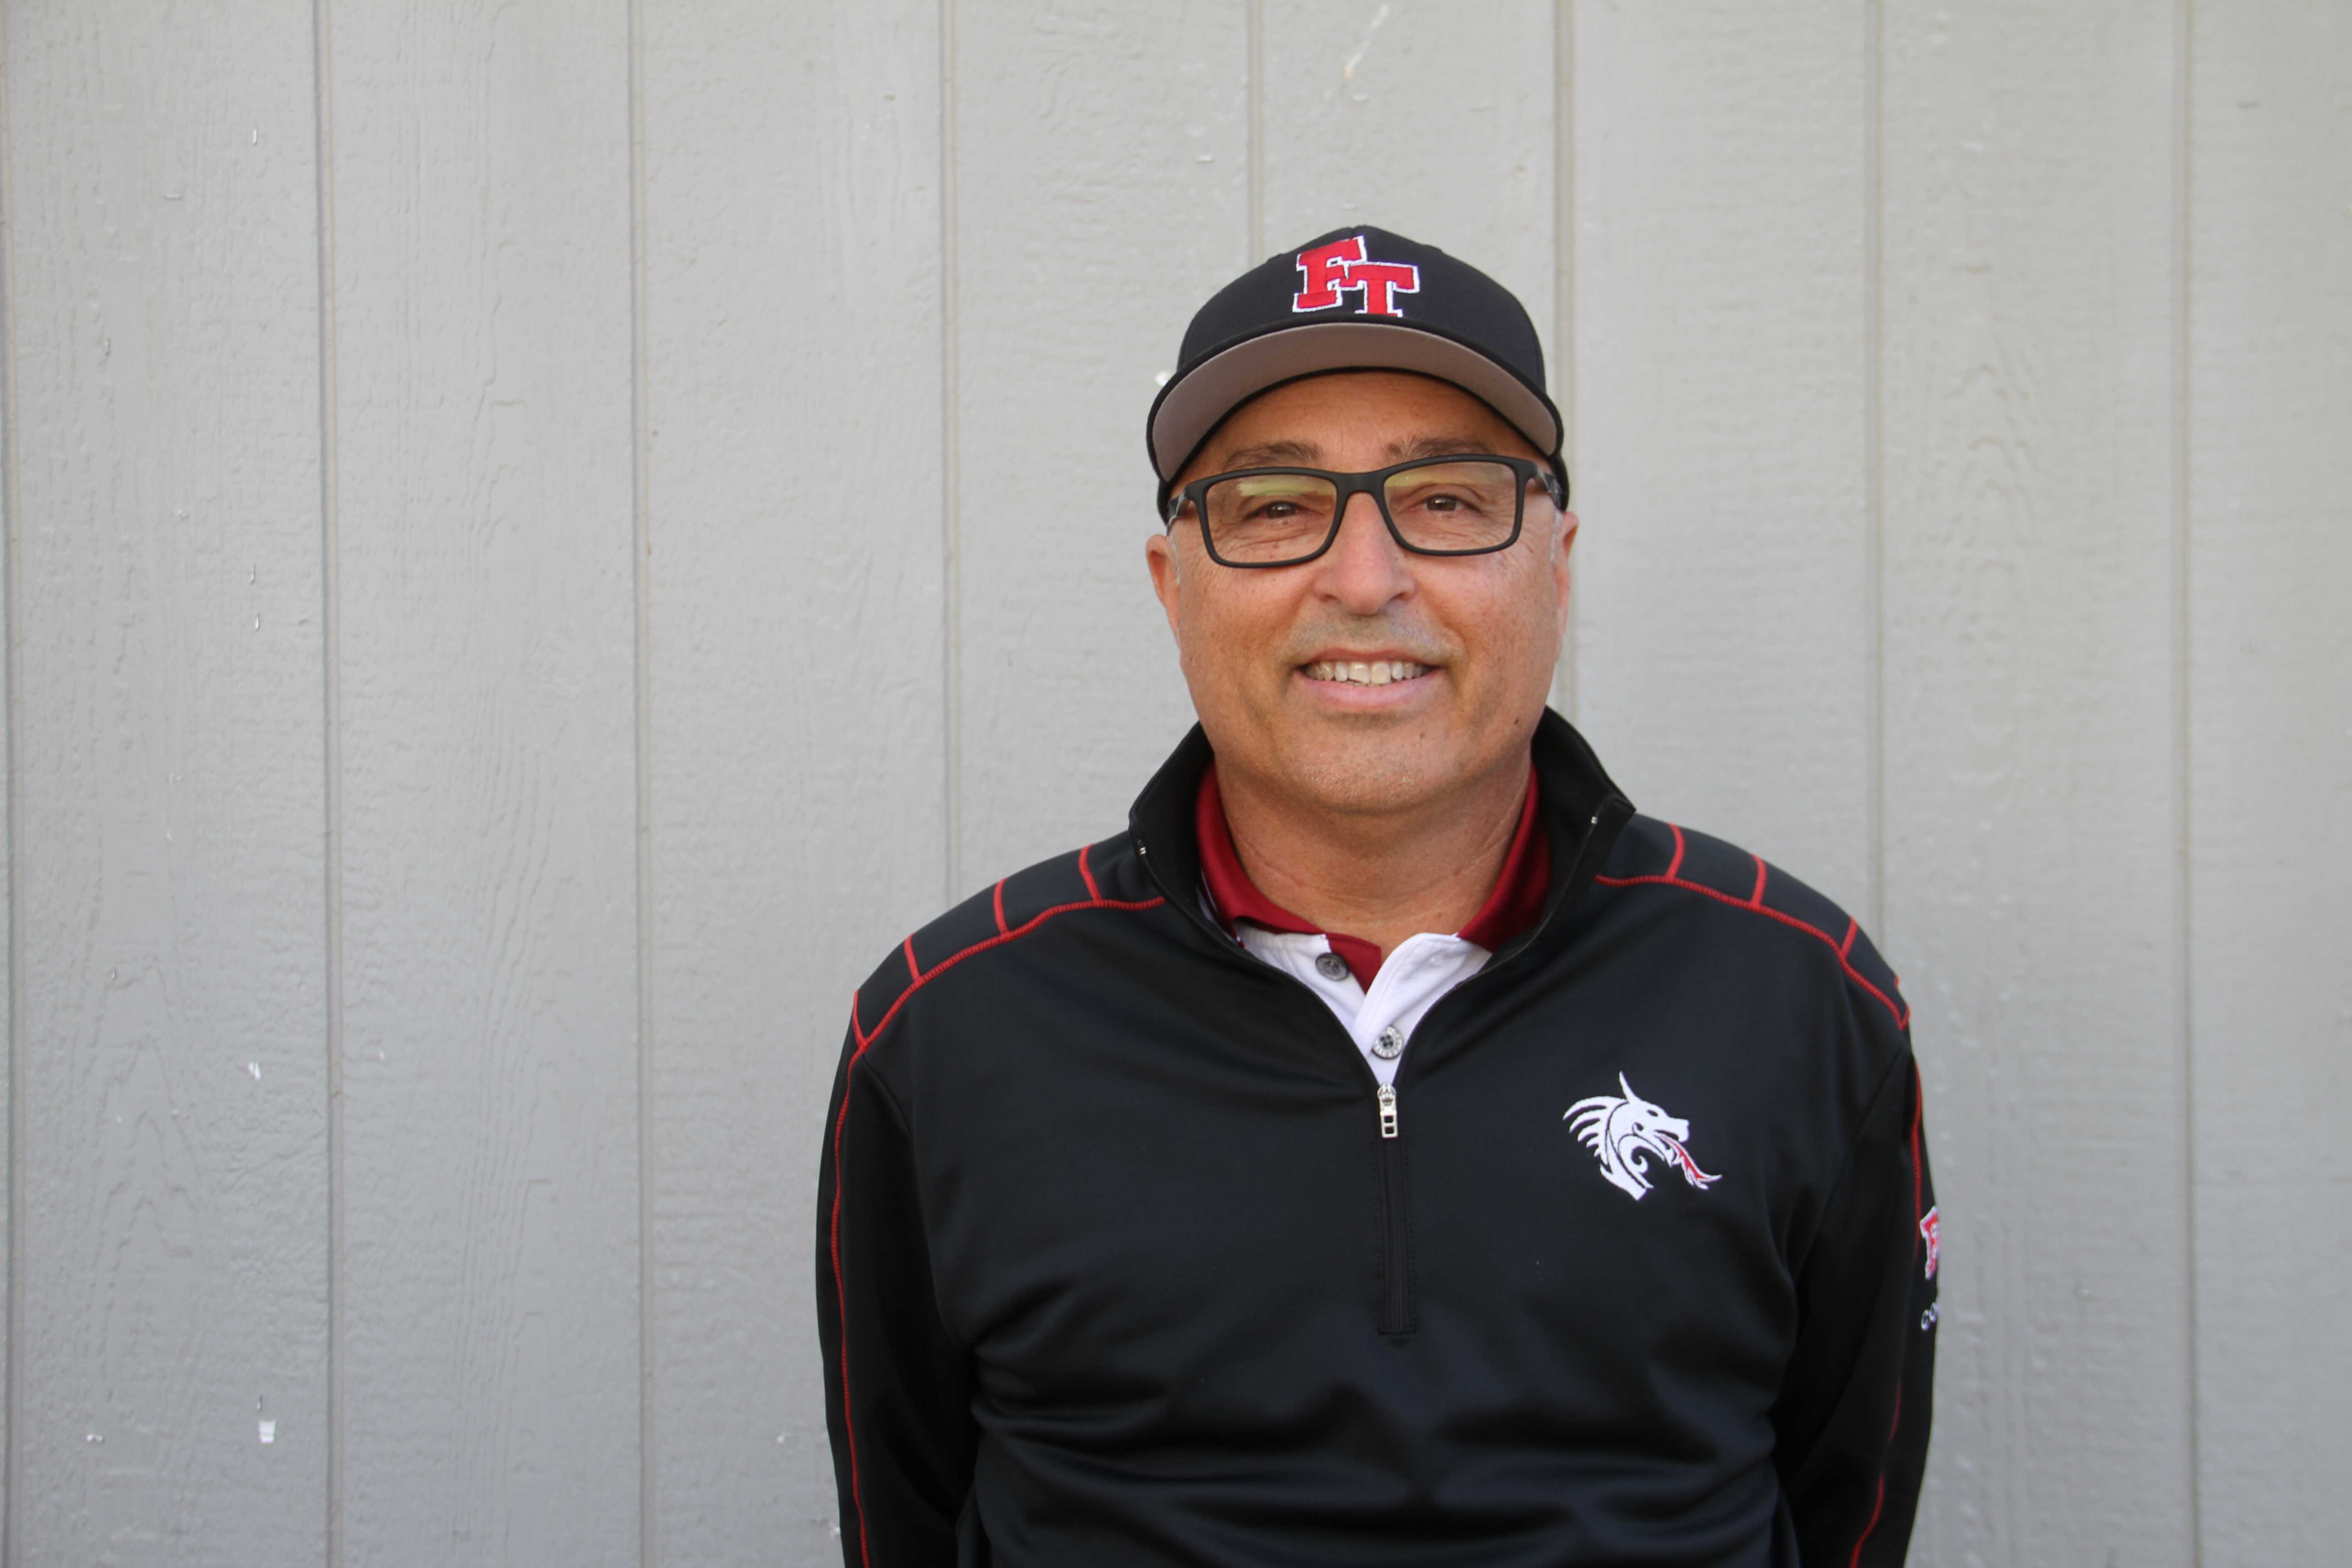 Coach Mark Wipf has enjoyed his first season working with the Foothill boys' golf team. Credit: Carrie Coonan/The Foothill Dragon Press